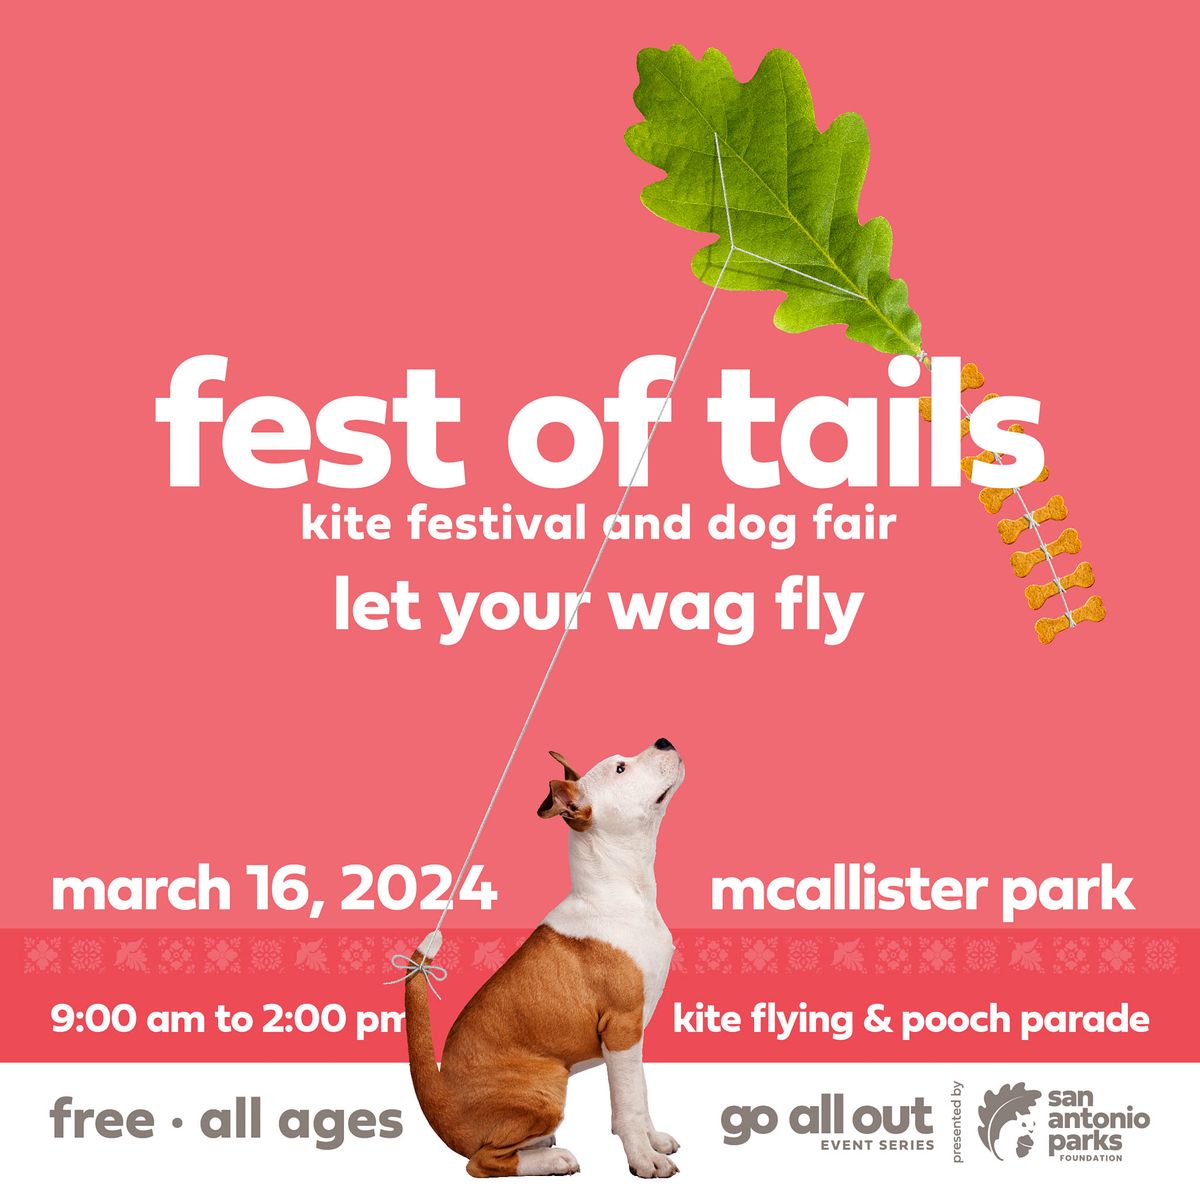 Fest of Tails